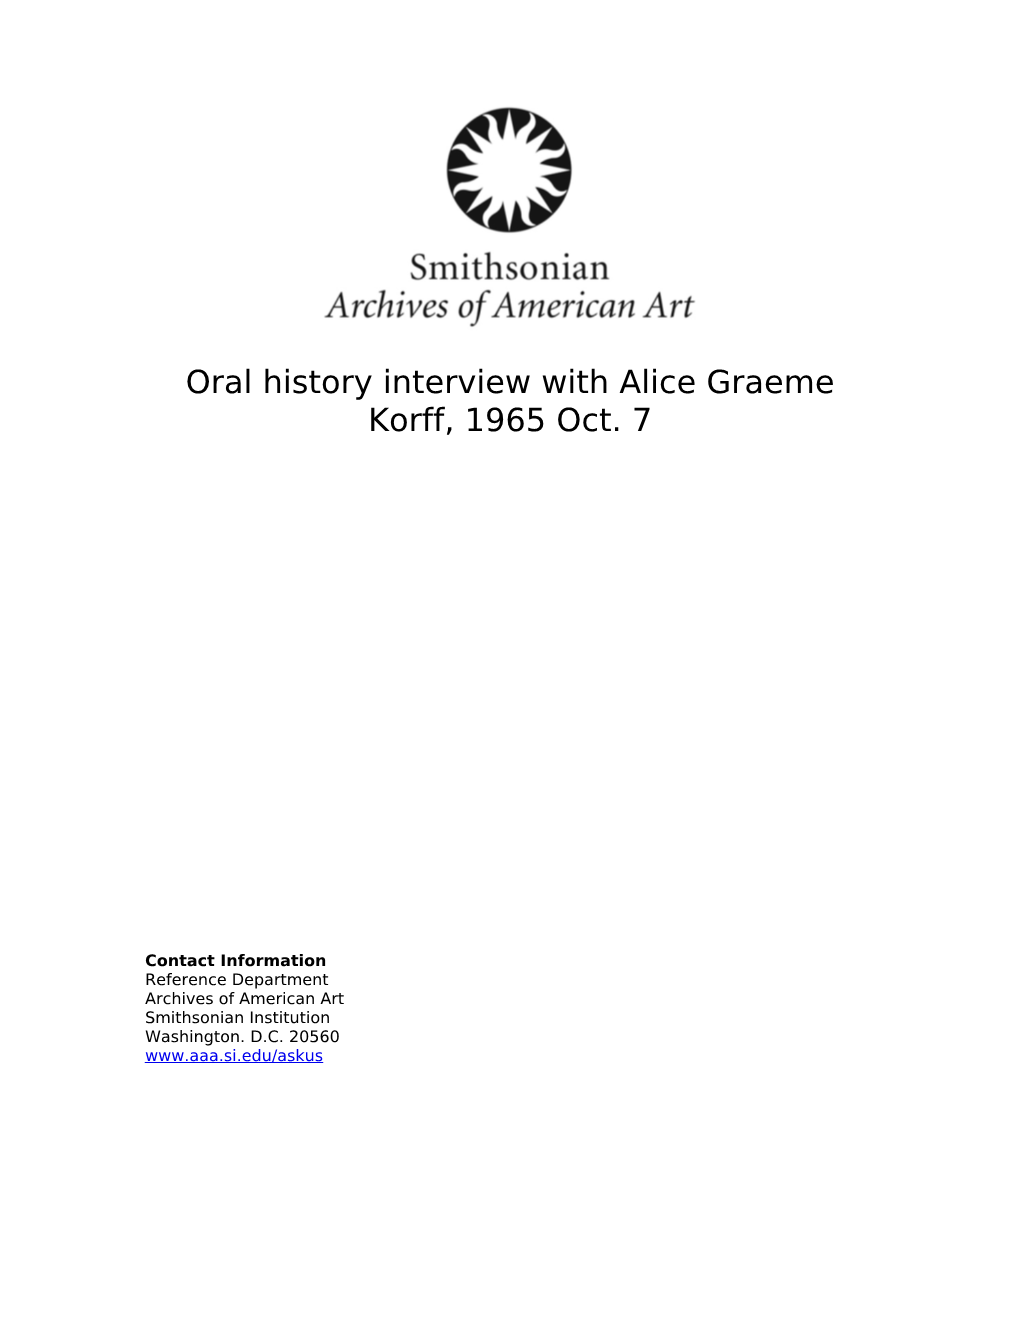 Oral History Interview with Alice Graeme Korff, 1965 Oct. 7